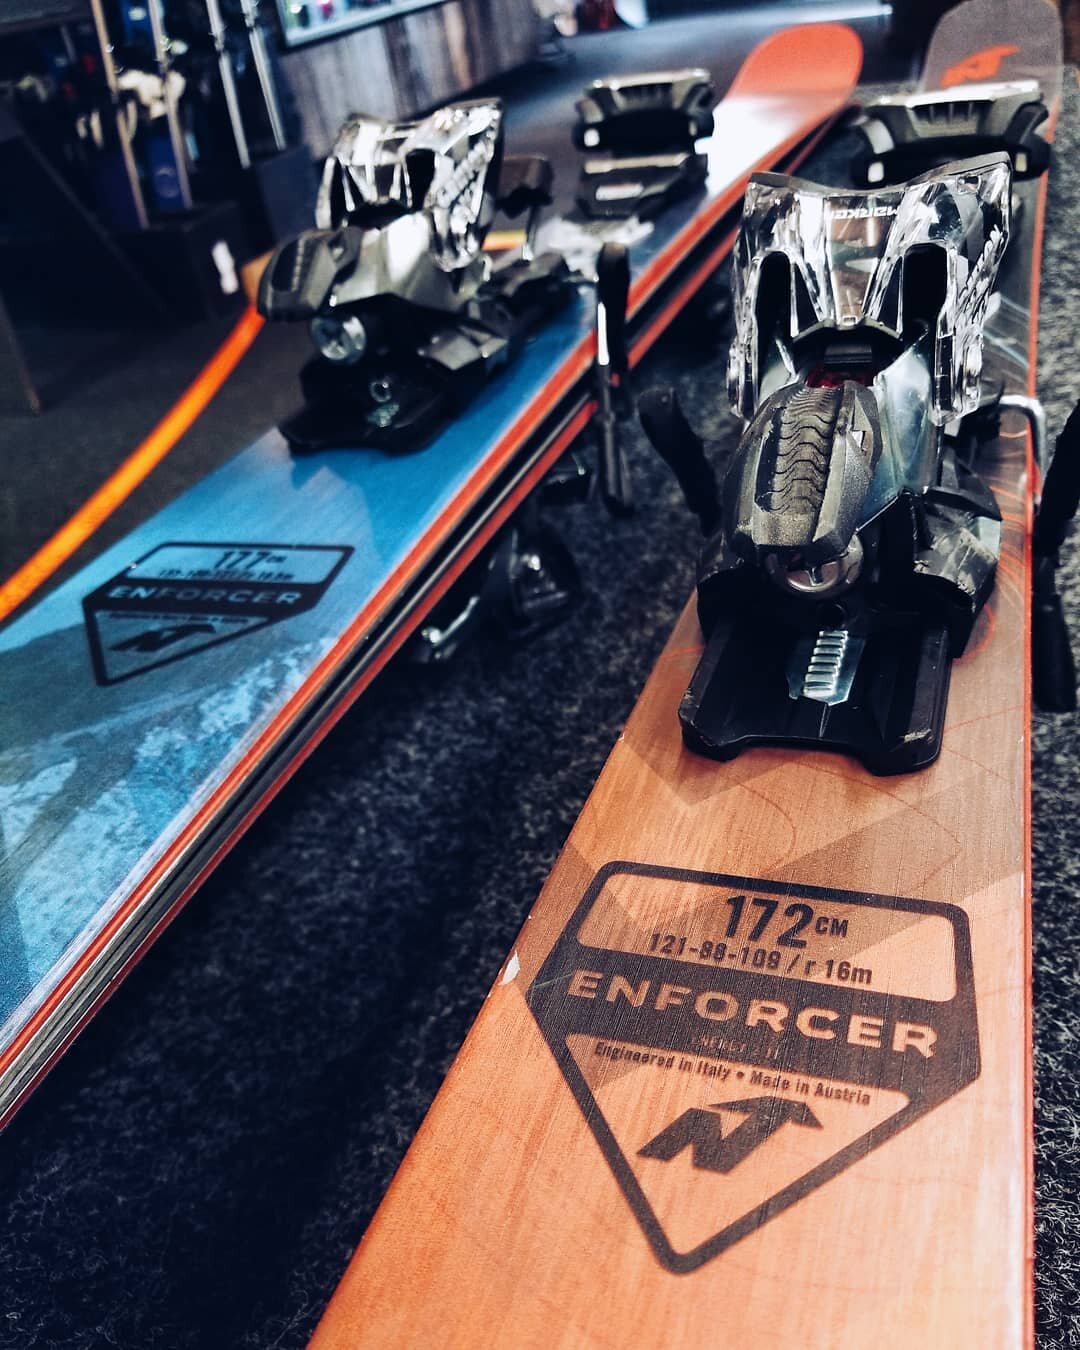 Have you tried our new Nordica Enforcers? ⛷We have a couple of them, both in 88mm and 100mm under foot! Check these guys out and take them up next time you hit the slopes! You won't regret it!
#winter #snow #mountains #sport #boots #skiboots #snowspo